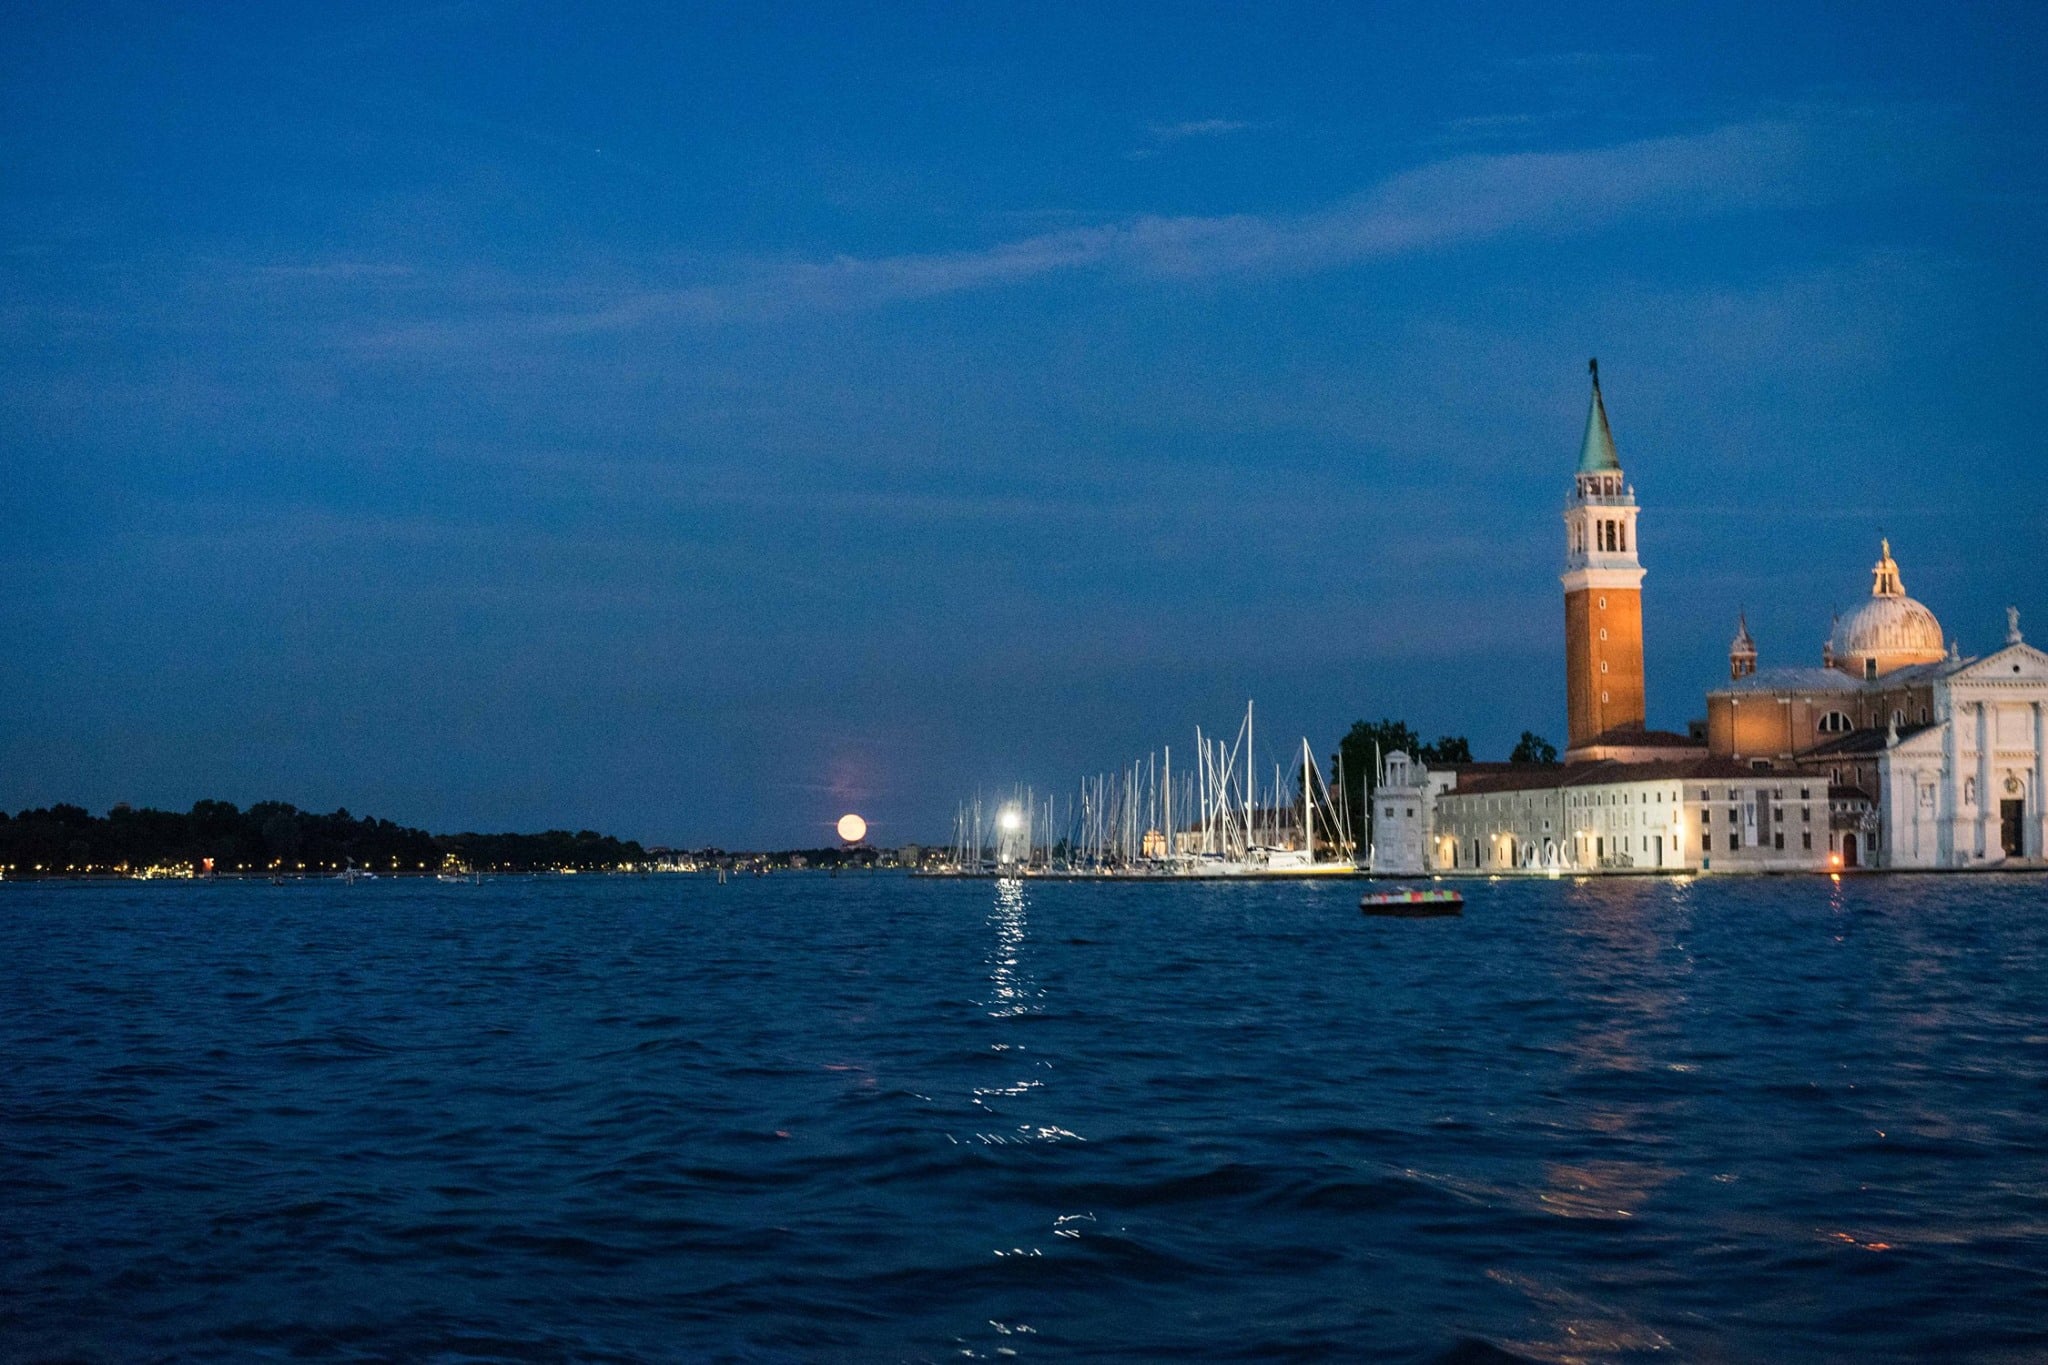 Strawberry Moon as seen from a Vaporetto (Water Bus), Venice, Italy